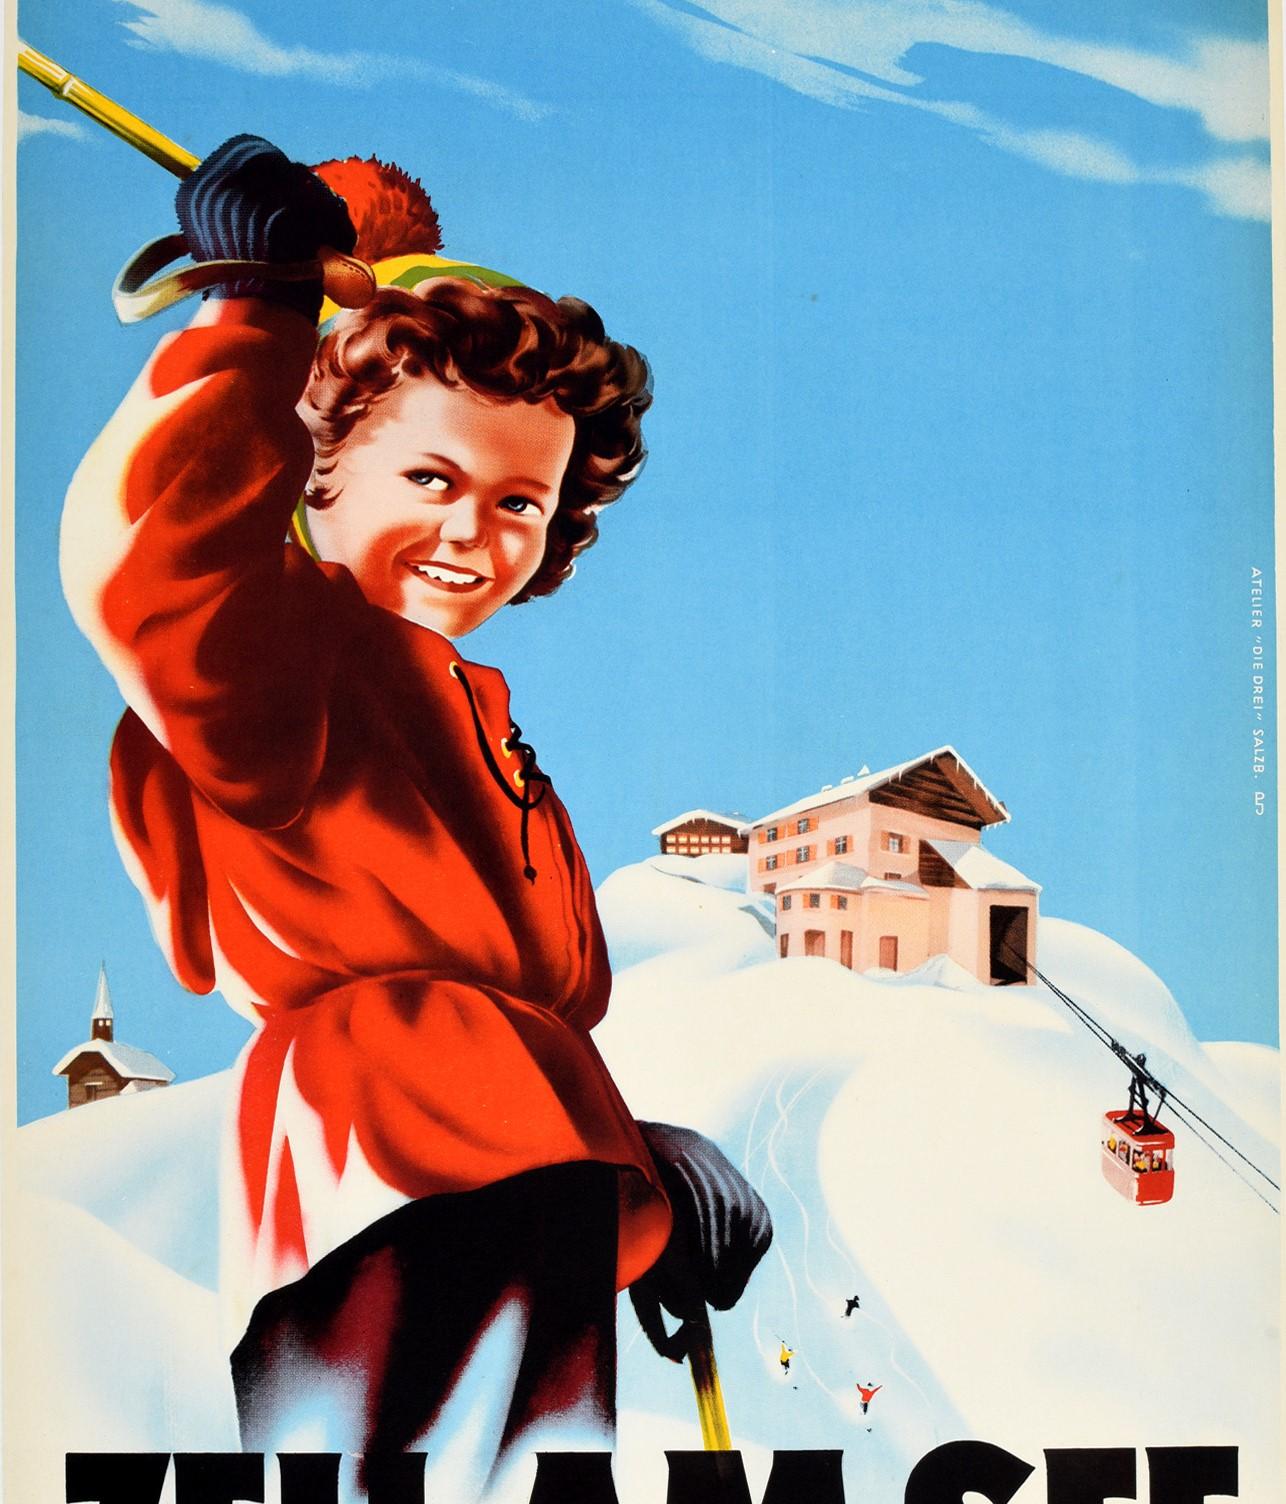 zell am see vintage poster